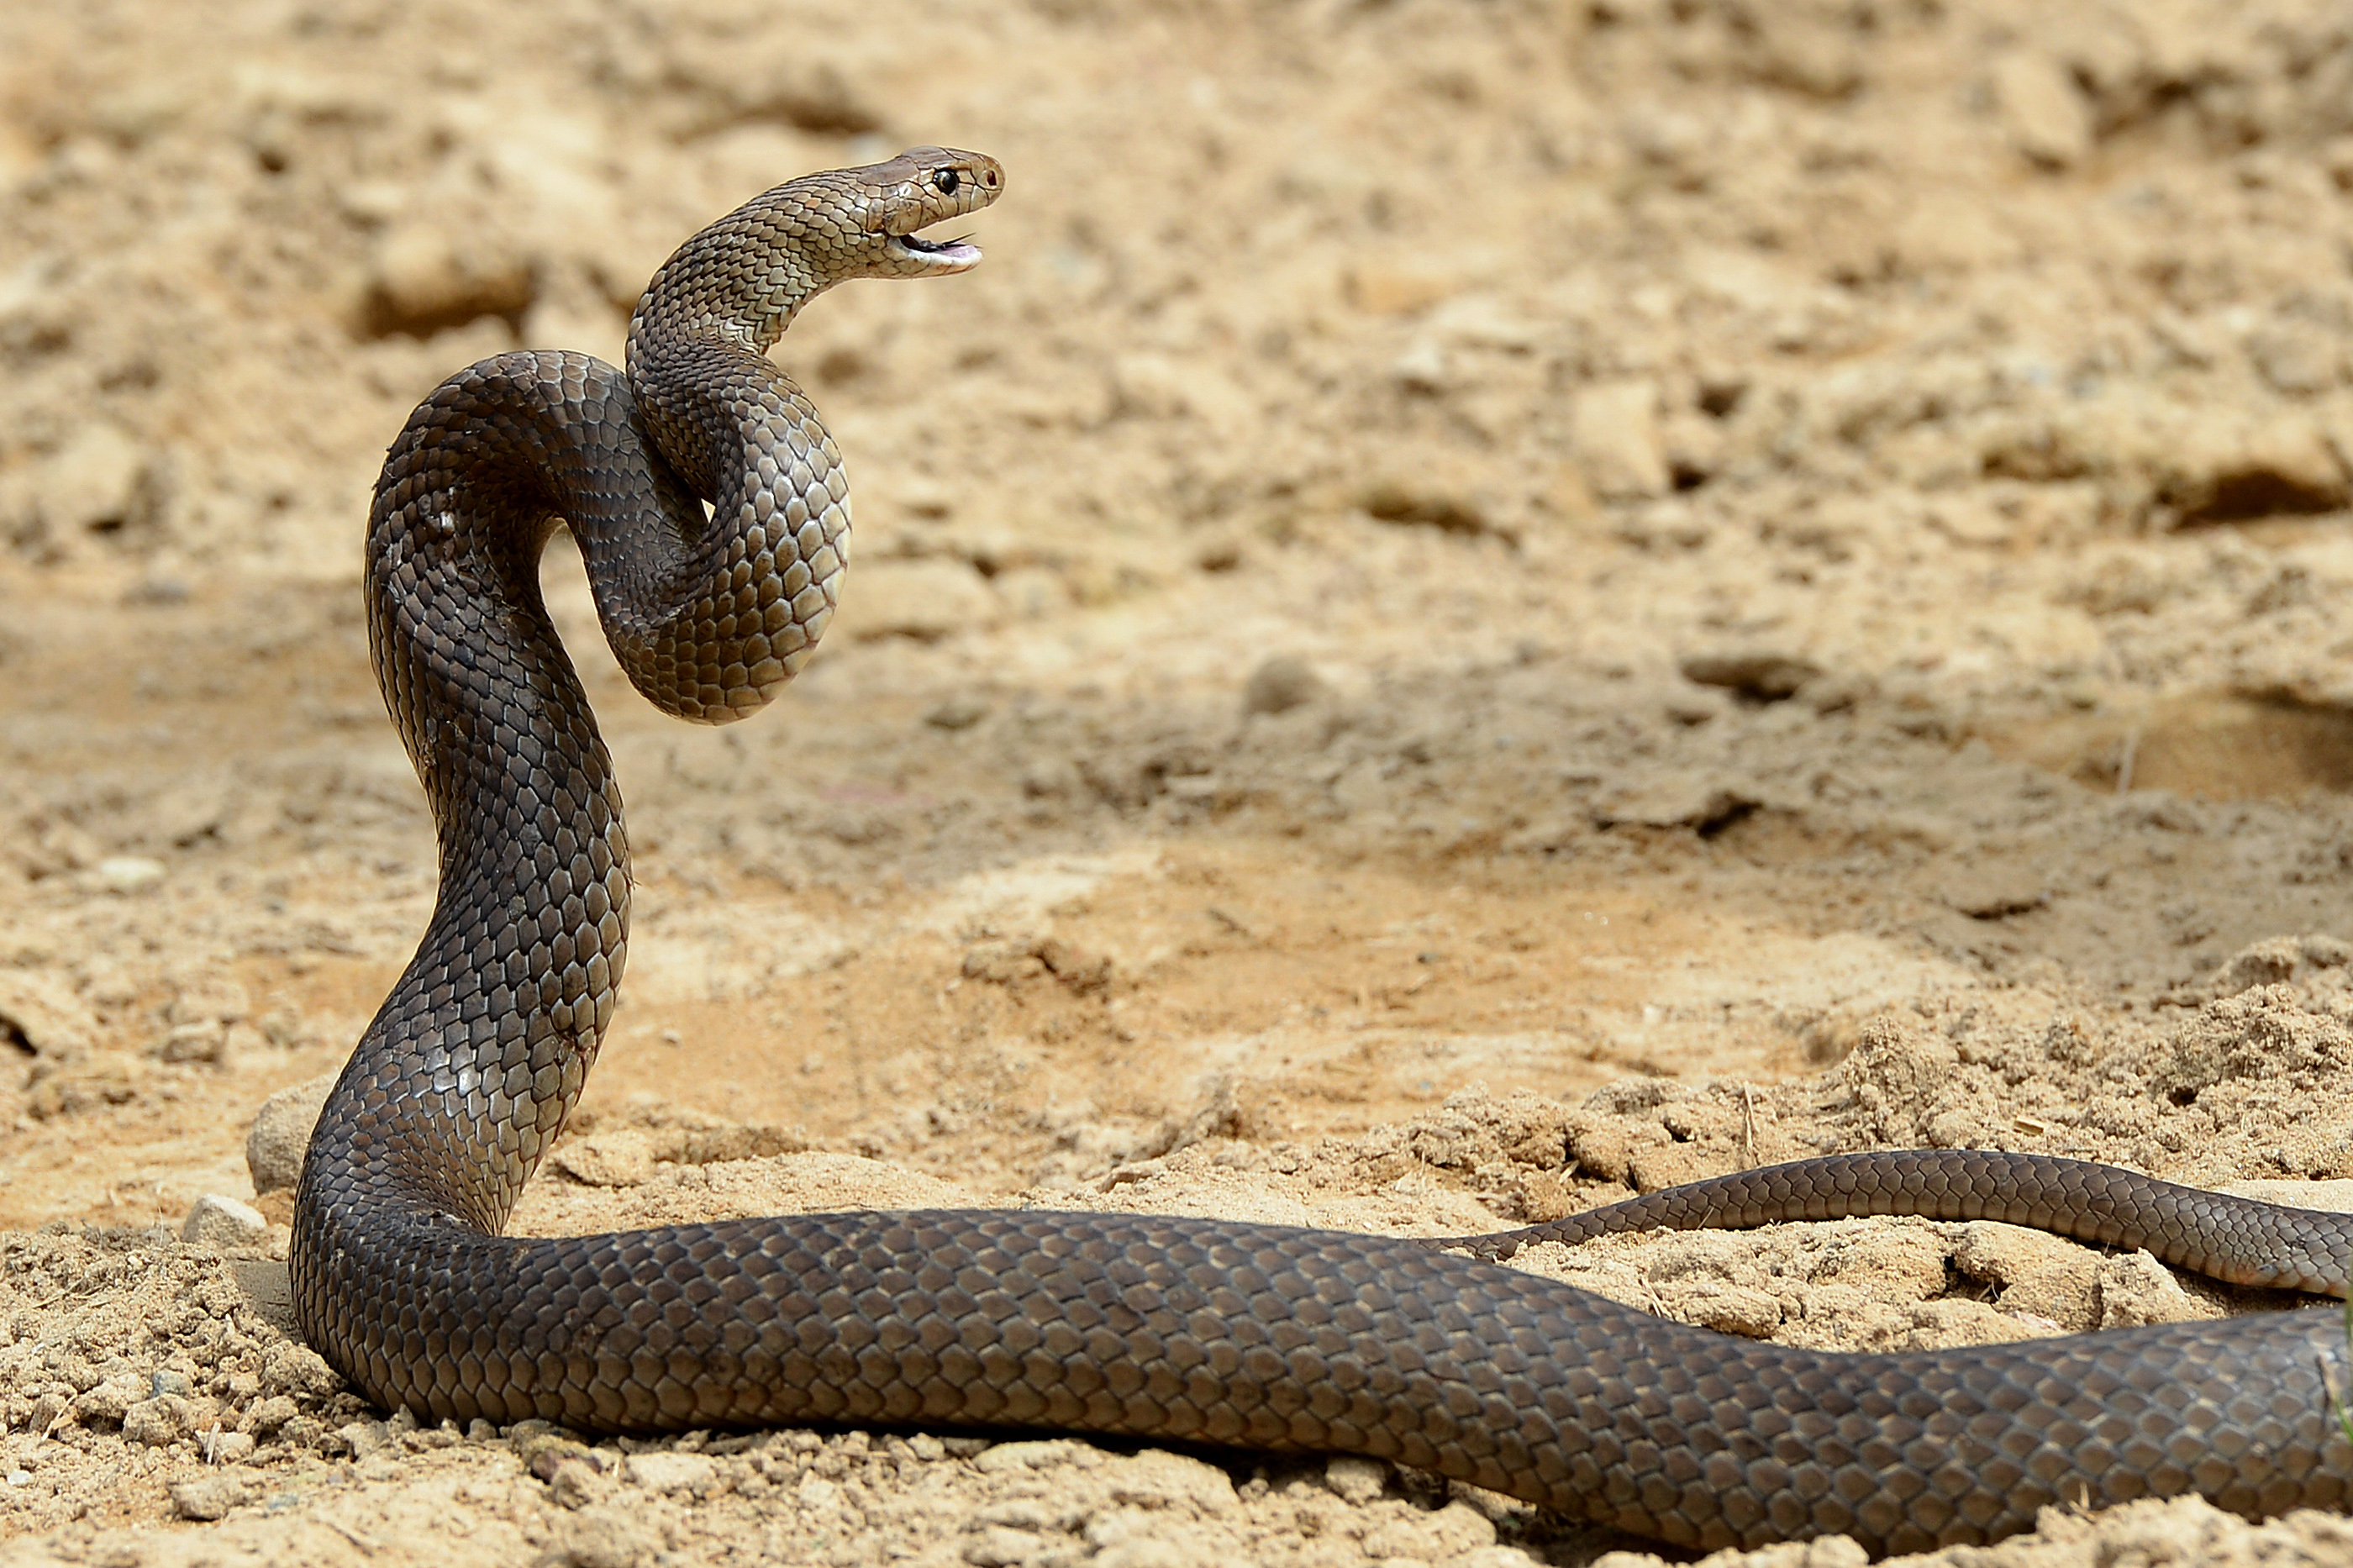 A deadly Australia eastern brown snake like this one can kill up to 20 adults. The brown rat snake found in Japan, meanwhile, was practically harmless. (William West&amp;;Getty Images)